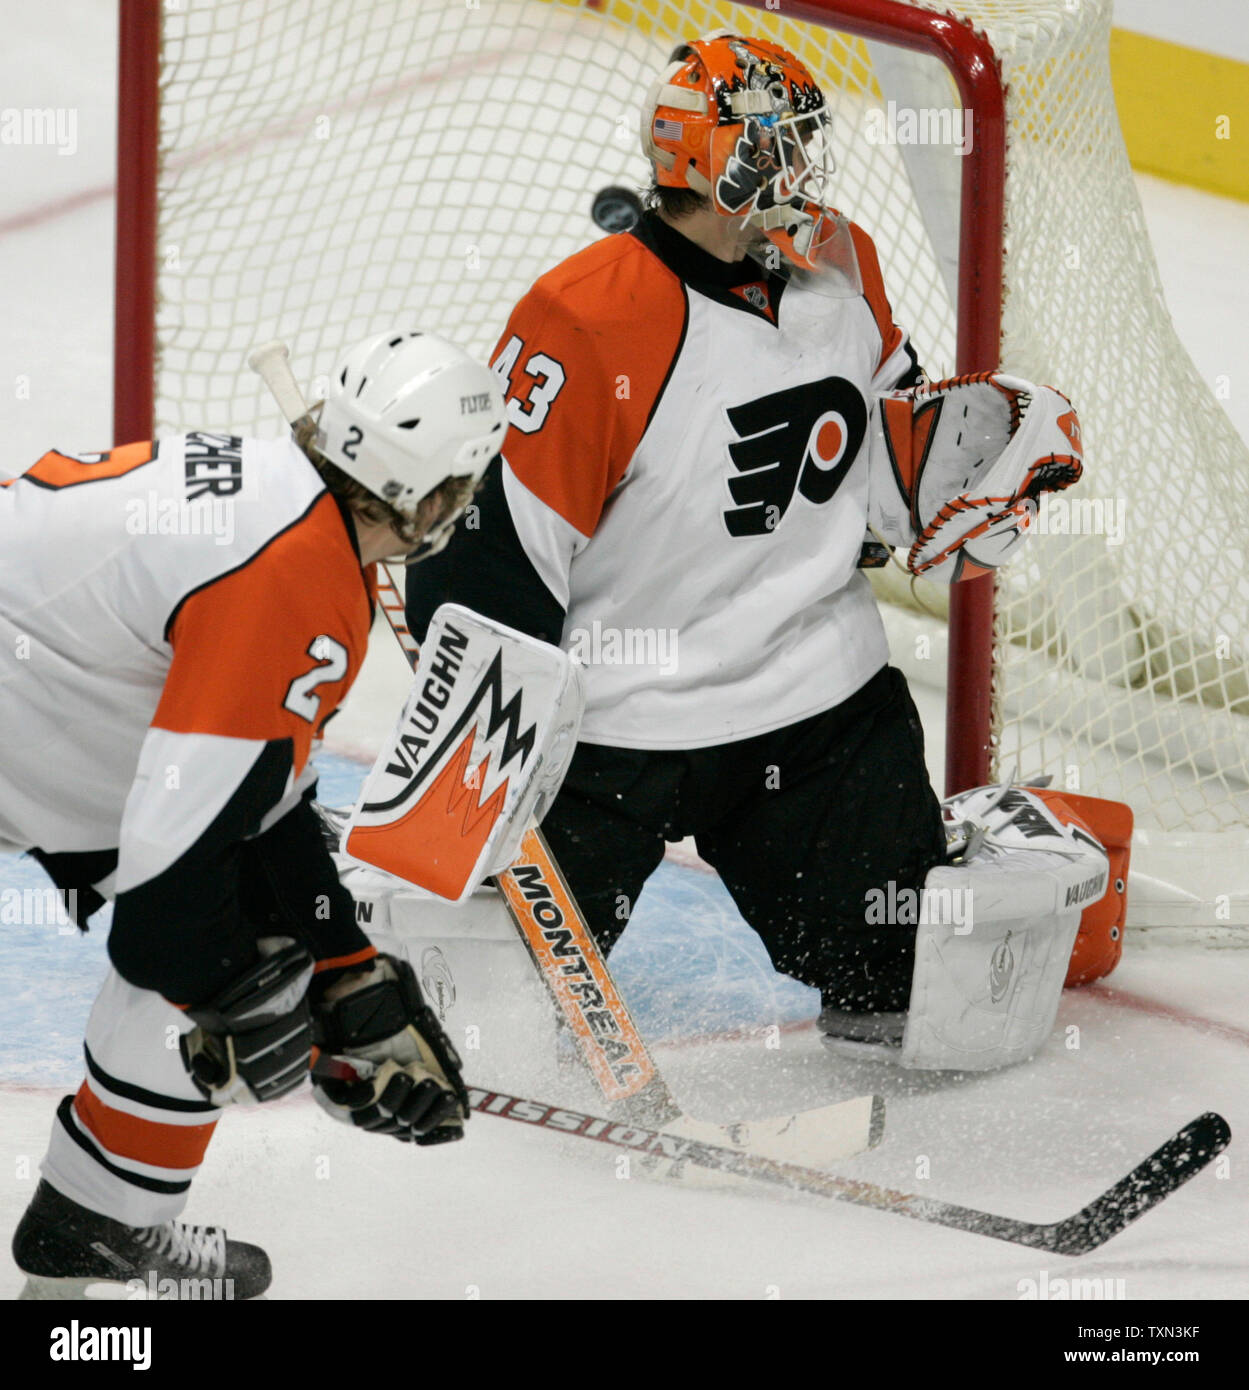 A Look Back On A Flyers Great: Derian Hatcher And What He Is Up To